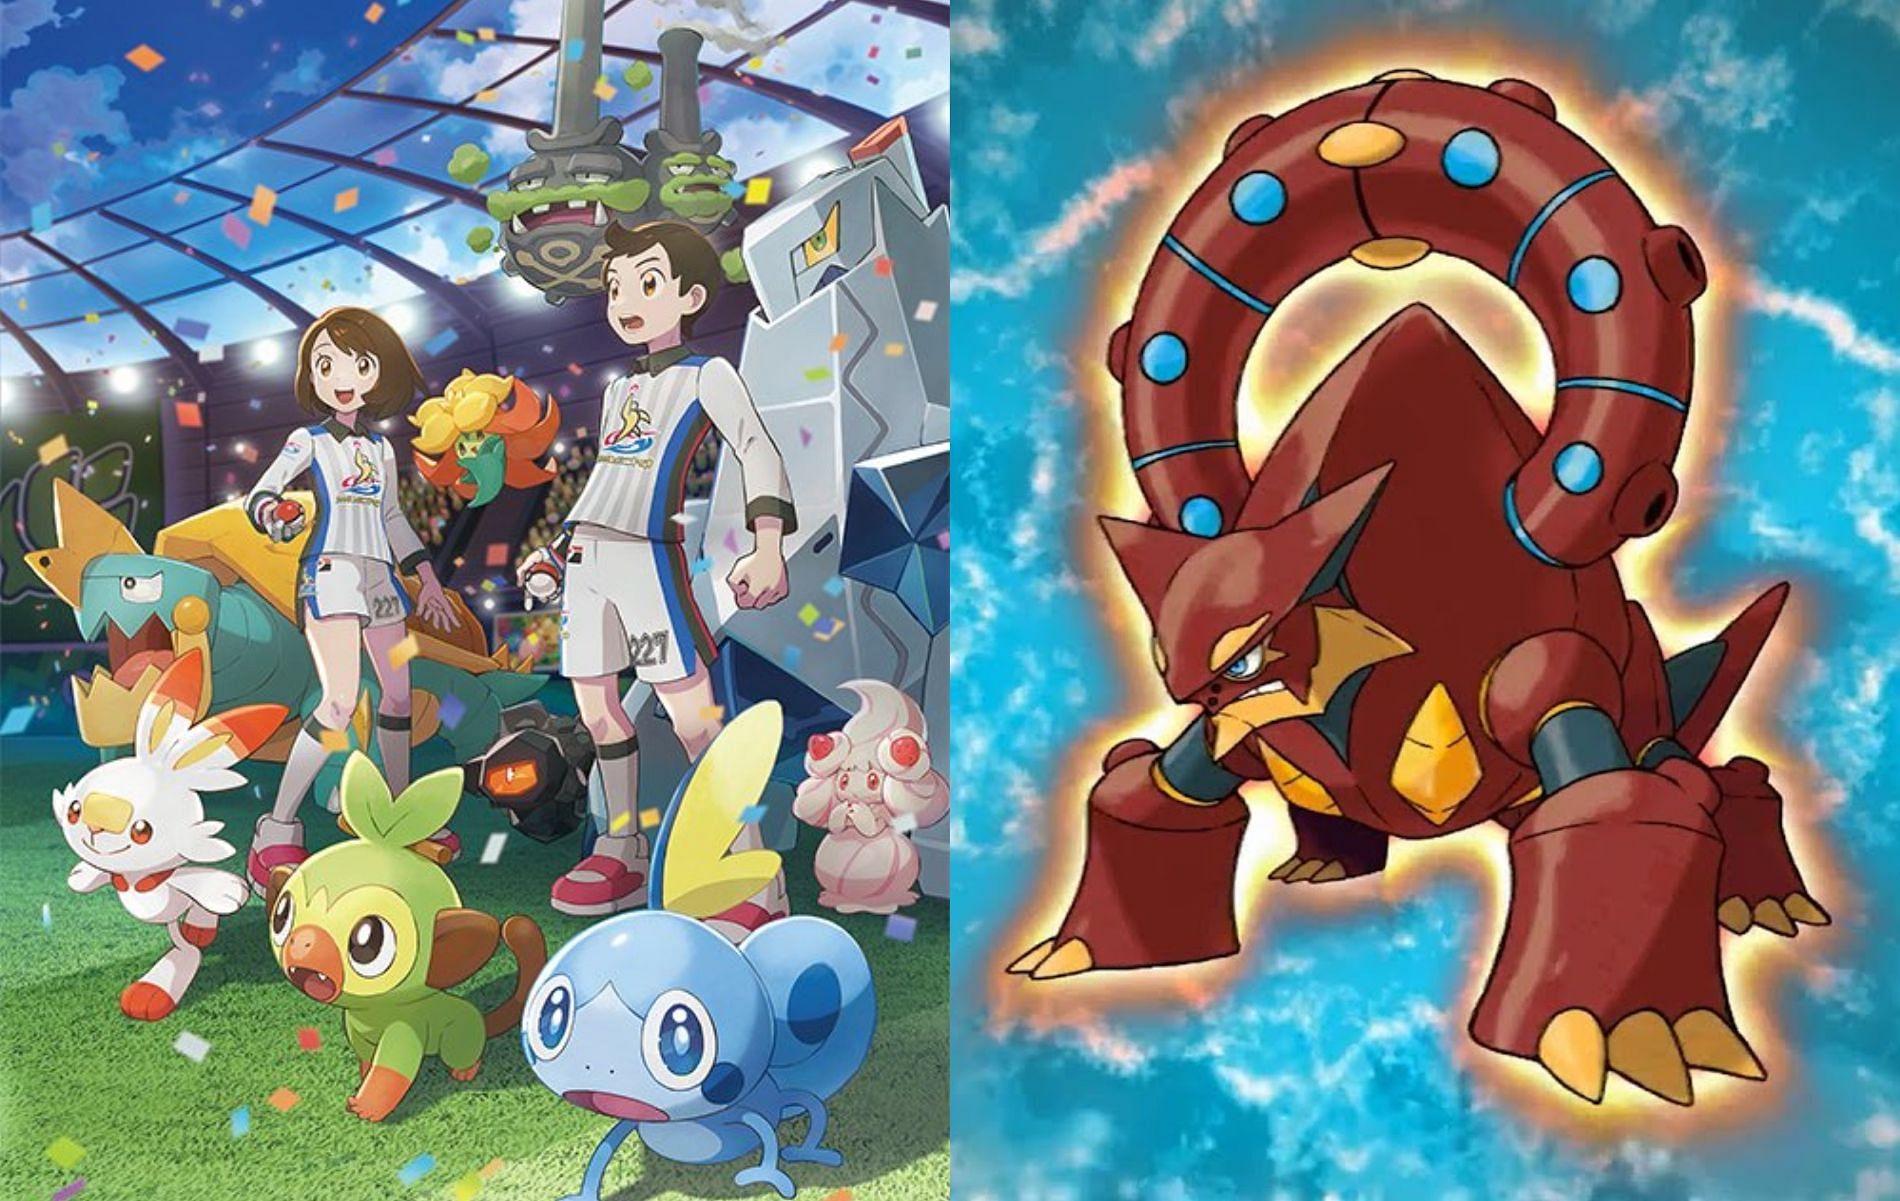 How to get Genesect, Volcanion, and Marshadow in Pokemon Sword and Shield  for free